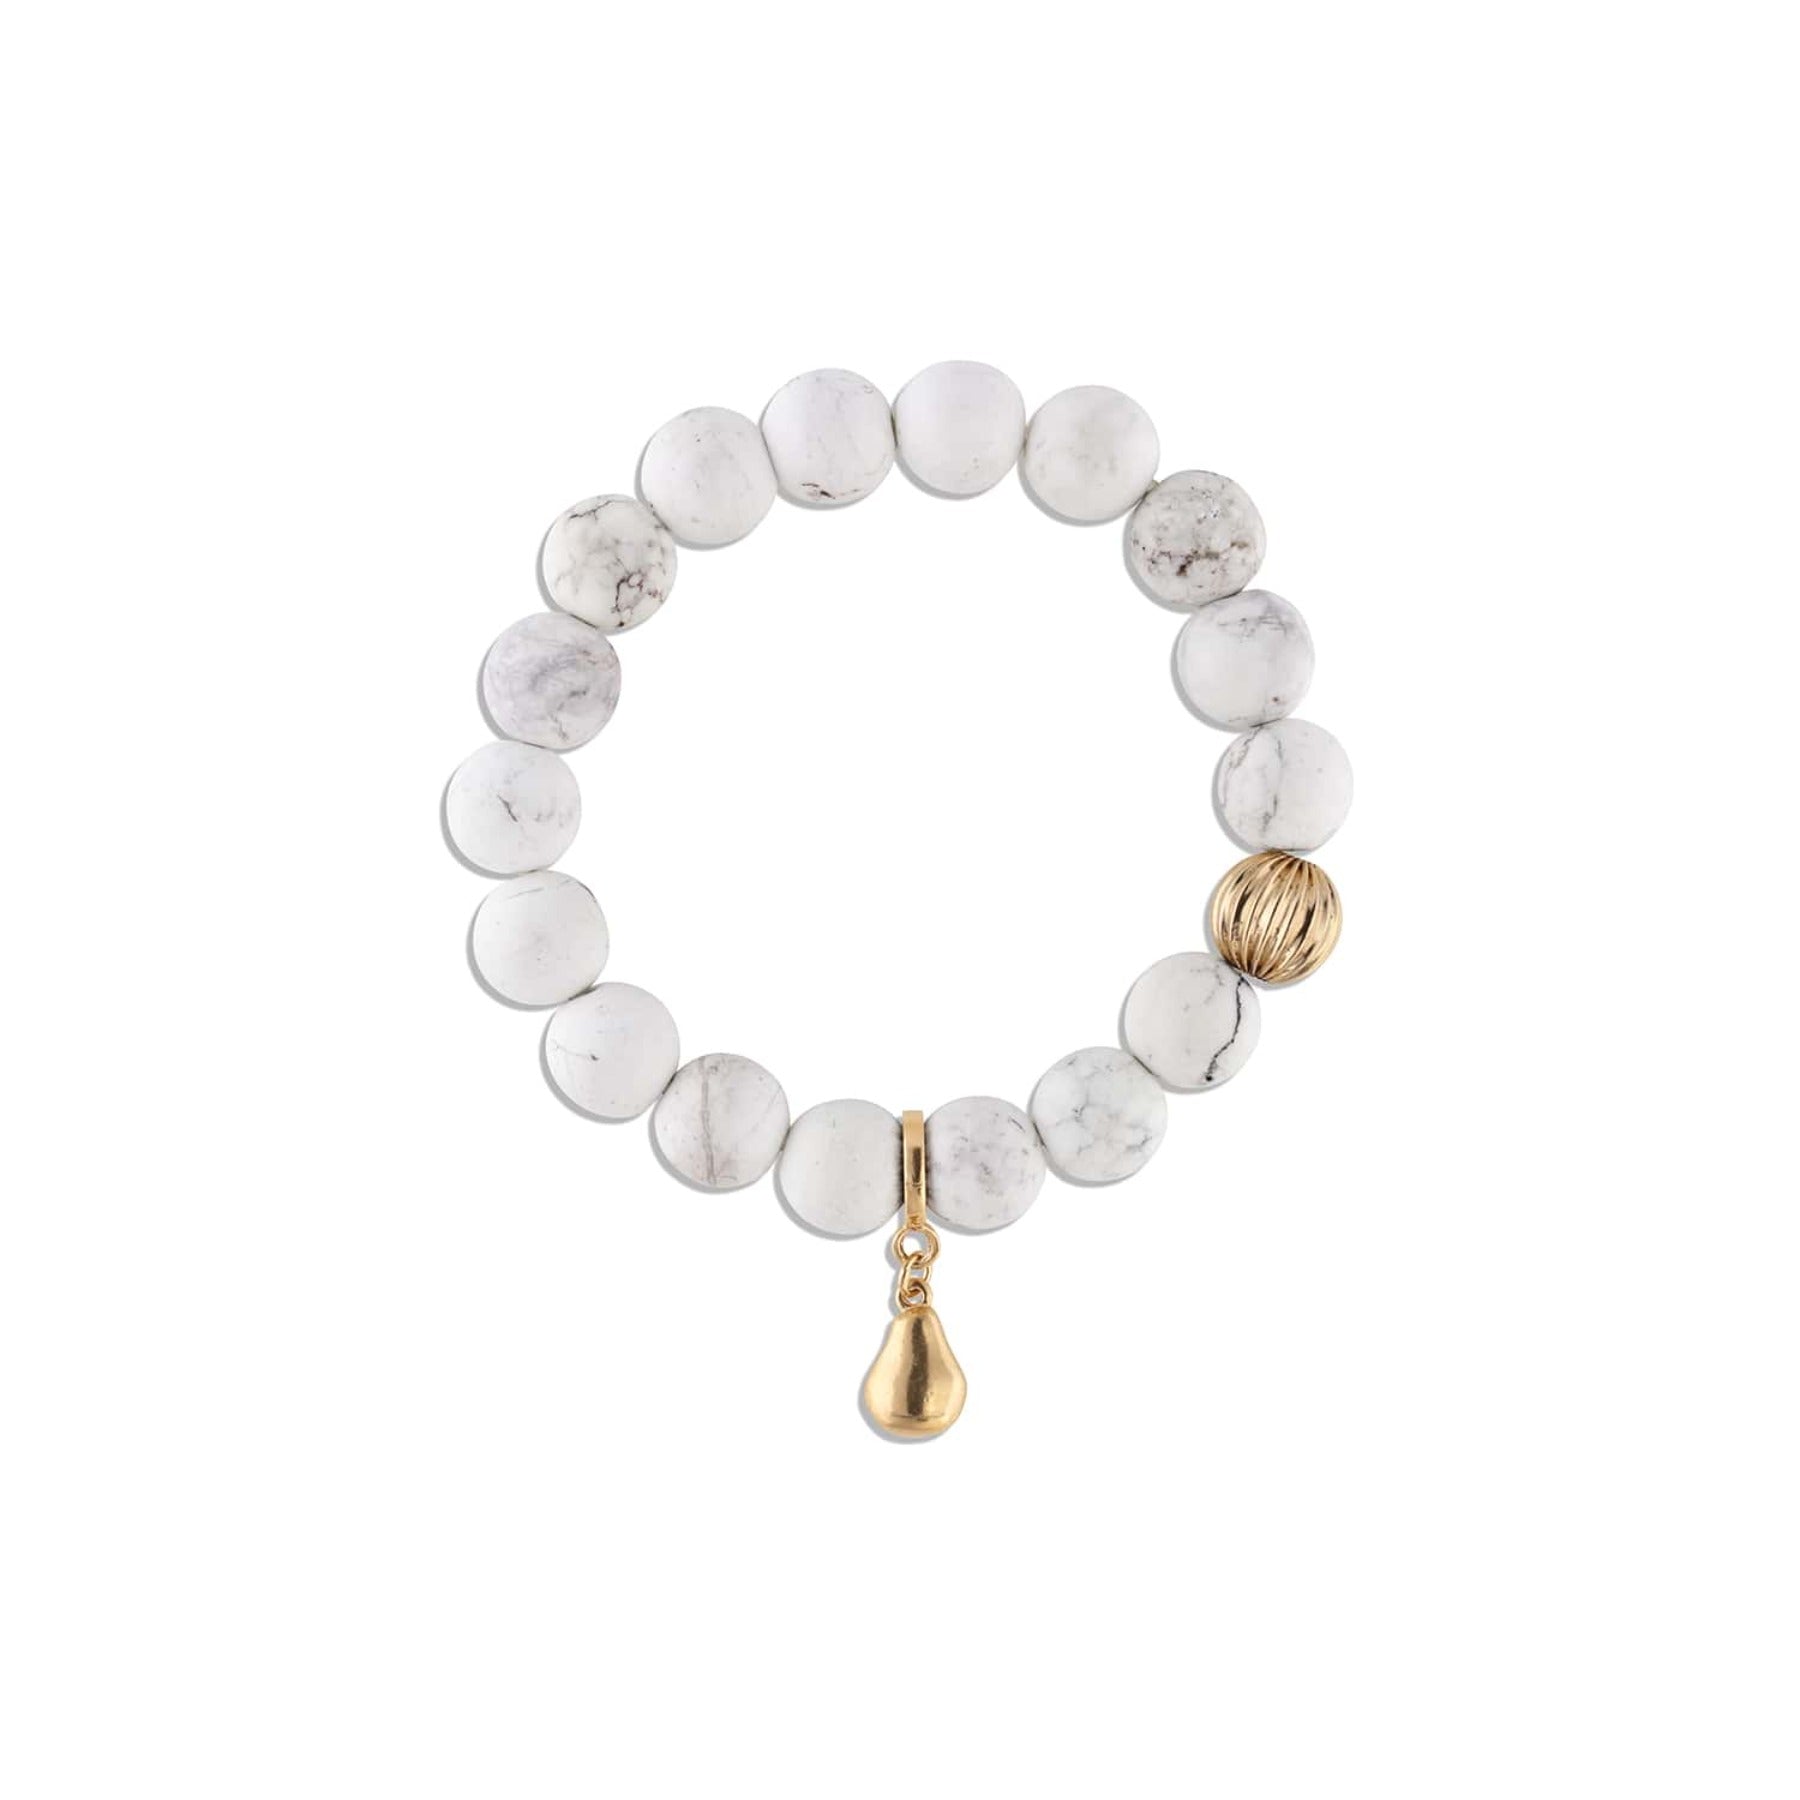 White turquoise crystal smooth gemstone elastic bracelet with 14k gold corrugated bead and pear charm.